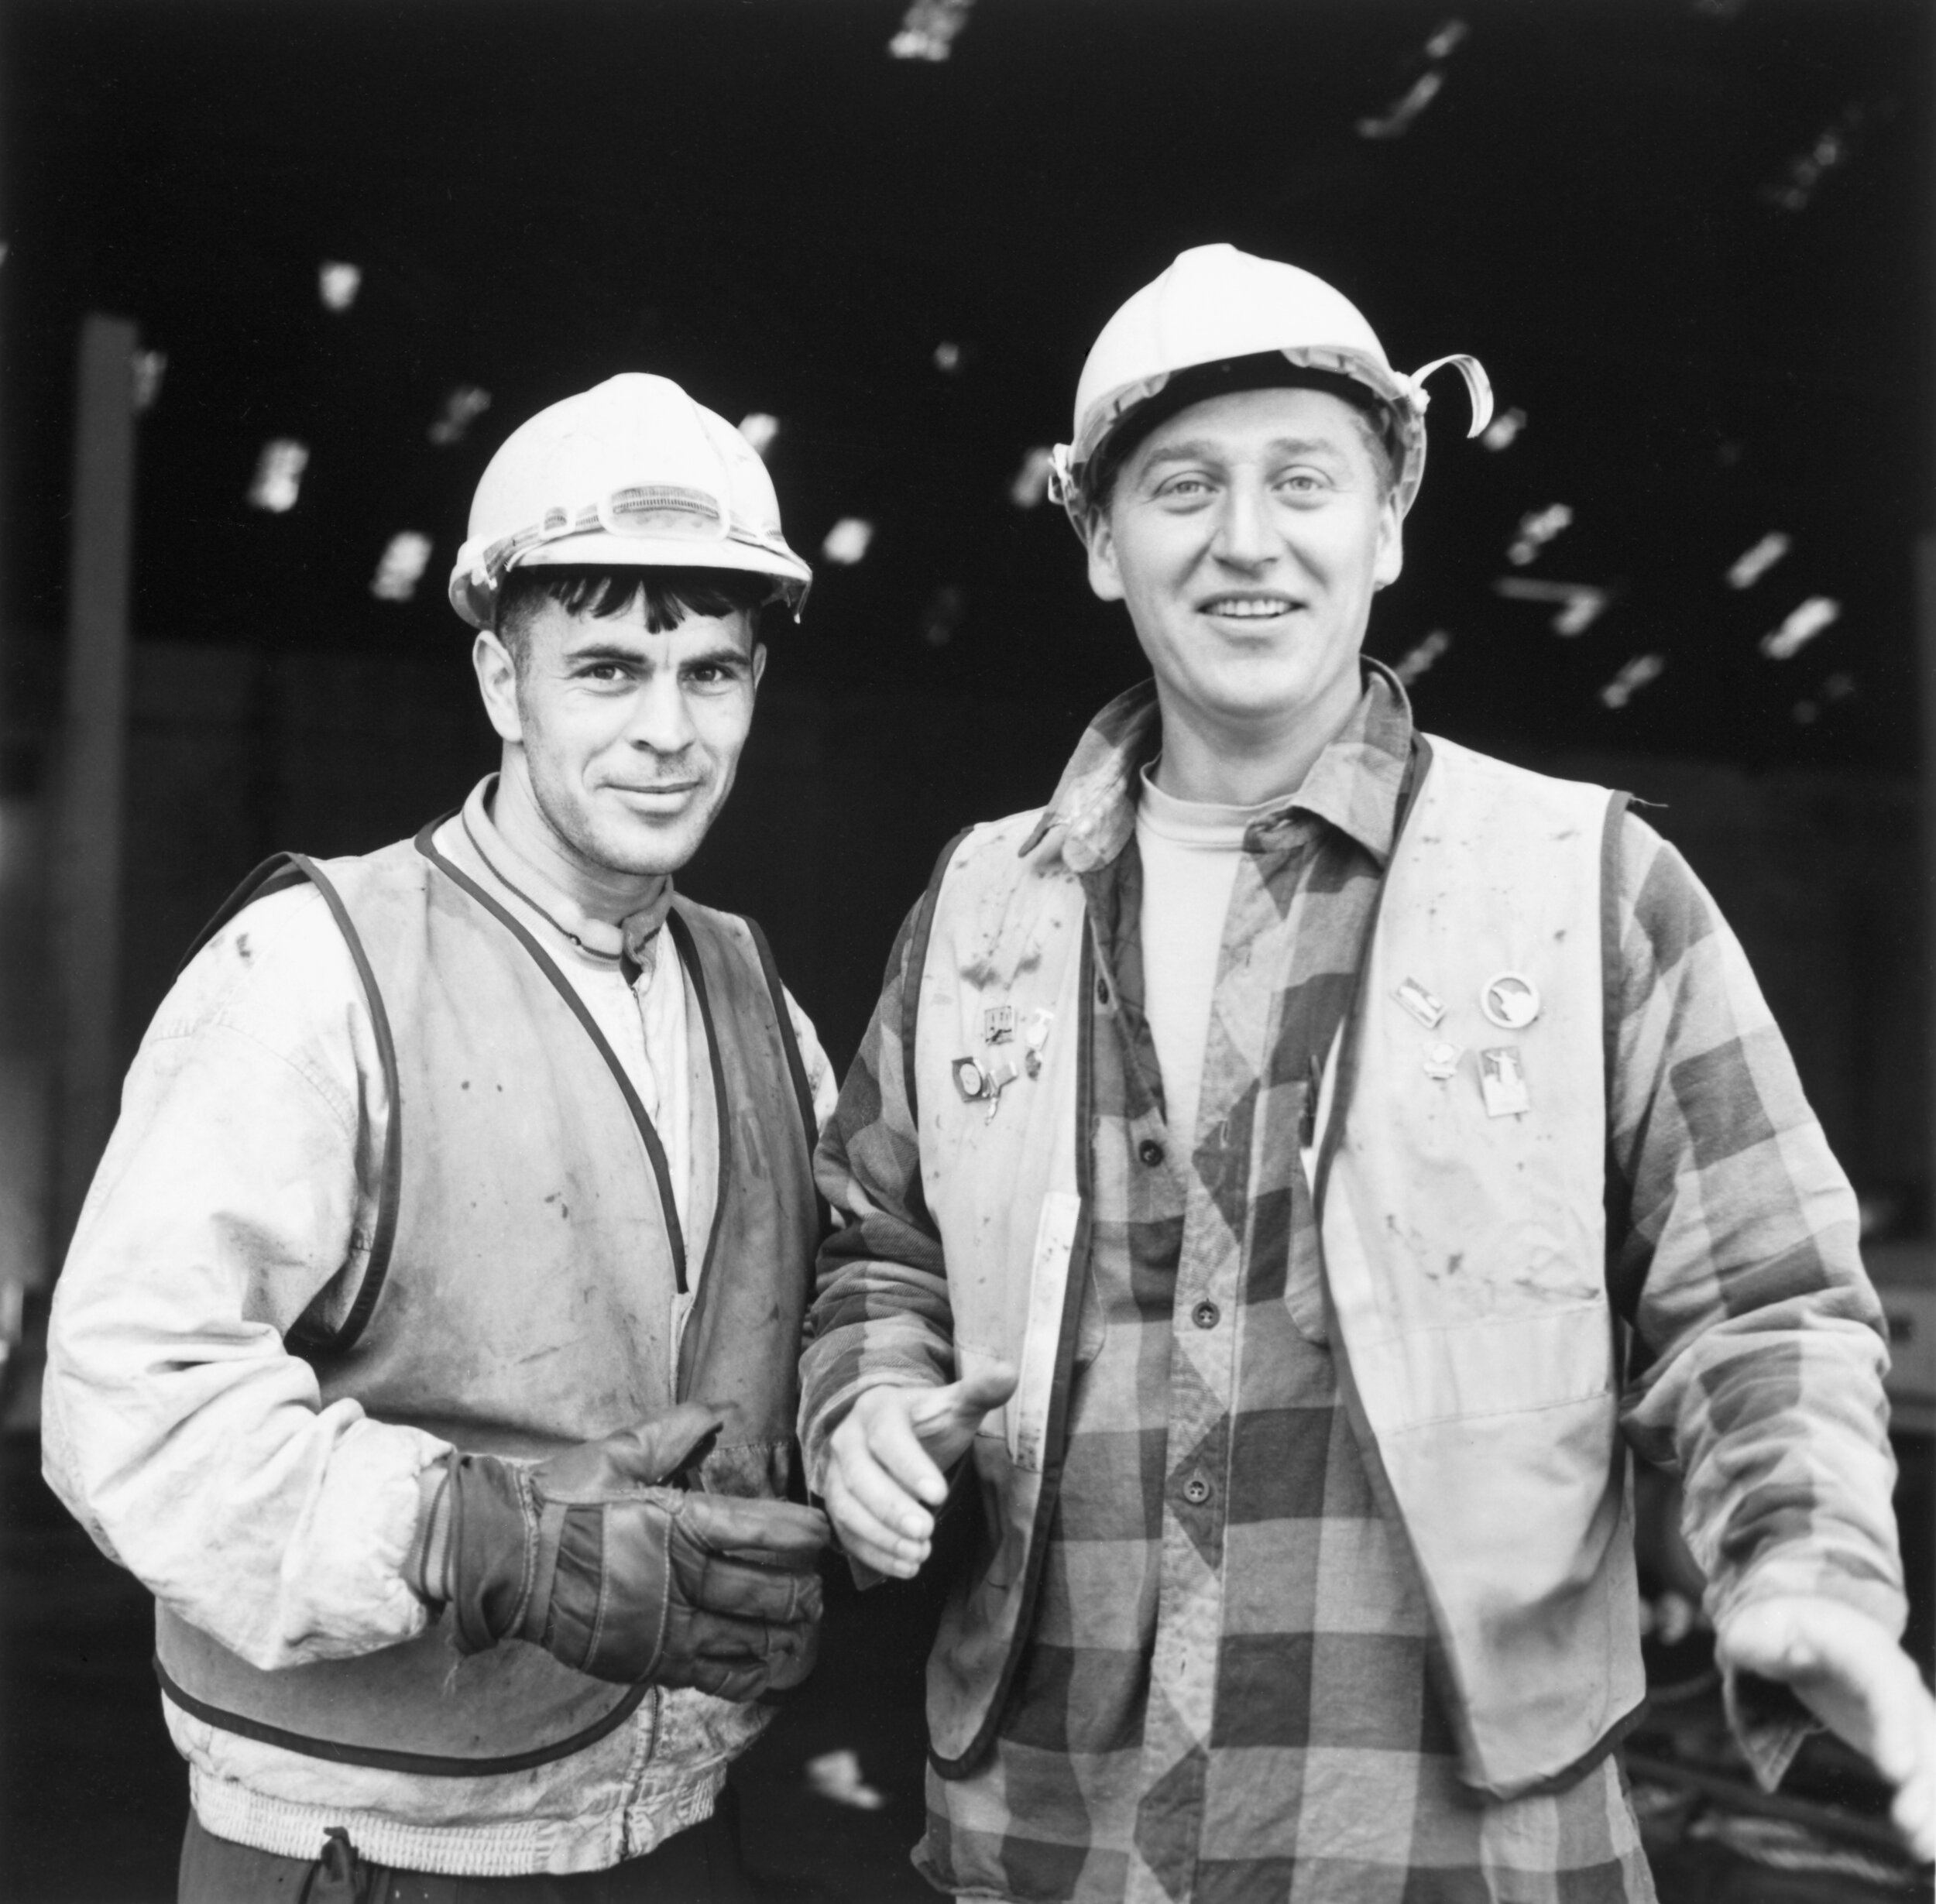 NED LOWE (left) & MIKE SILVANO  CANADA DOCK  JULY 5, 1993